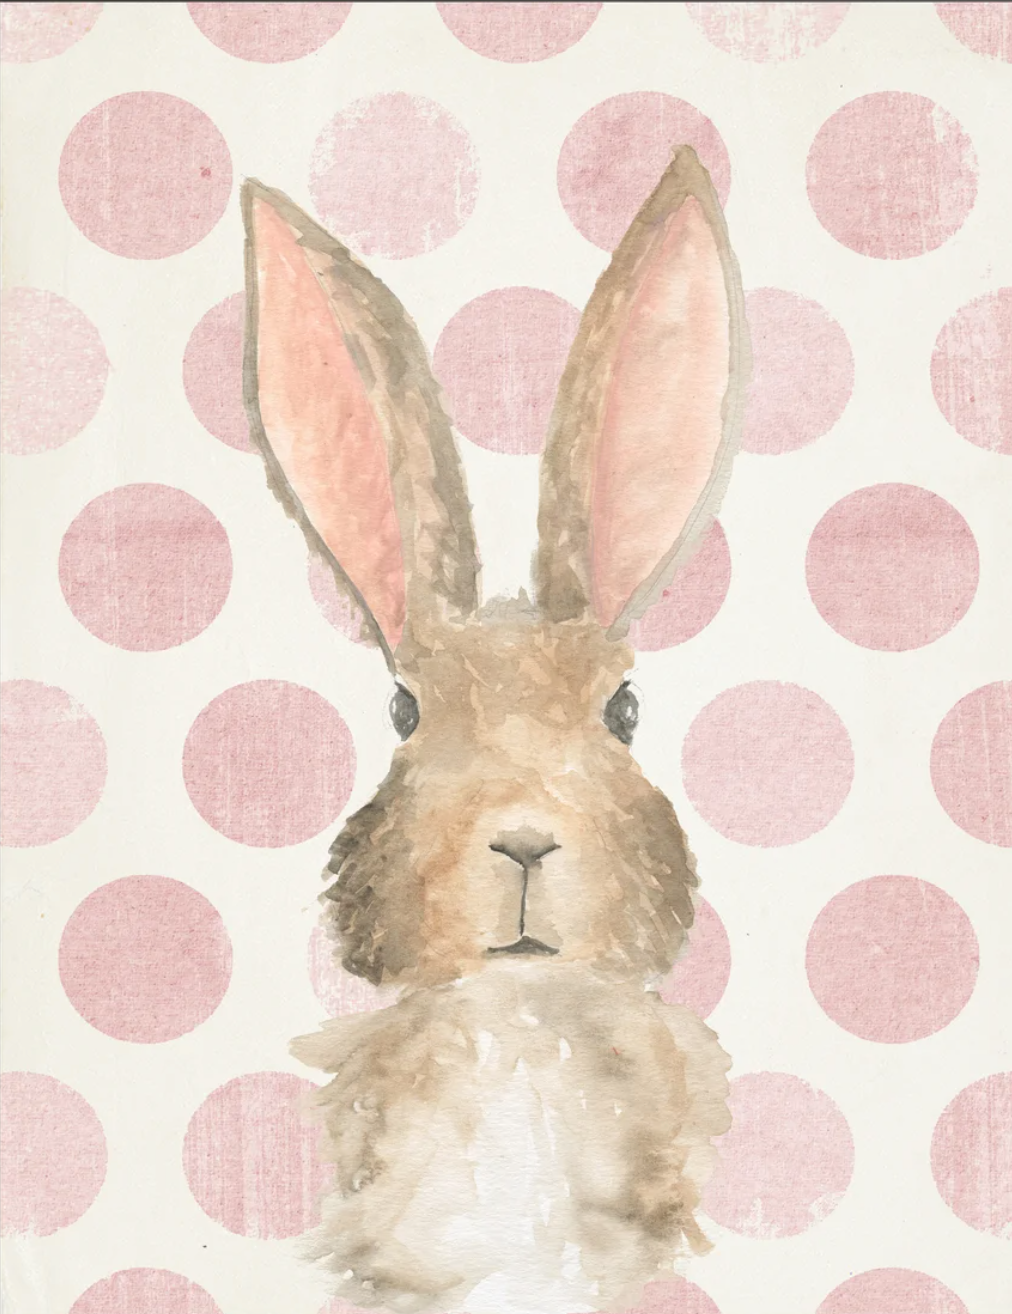 Framed Art, Watercolor Baby Bunny on Pink Dot